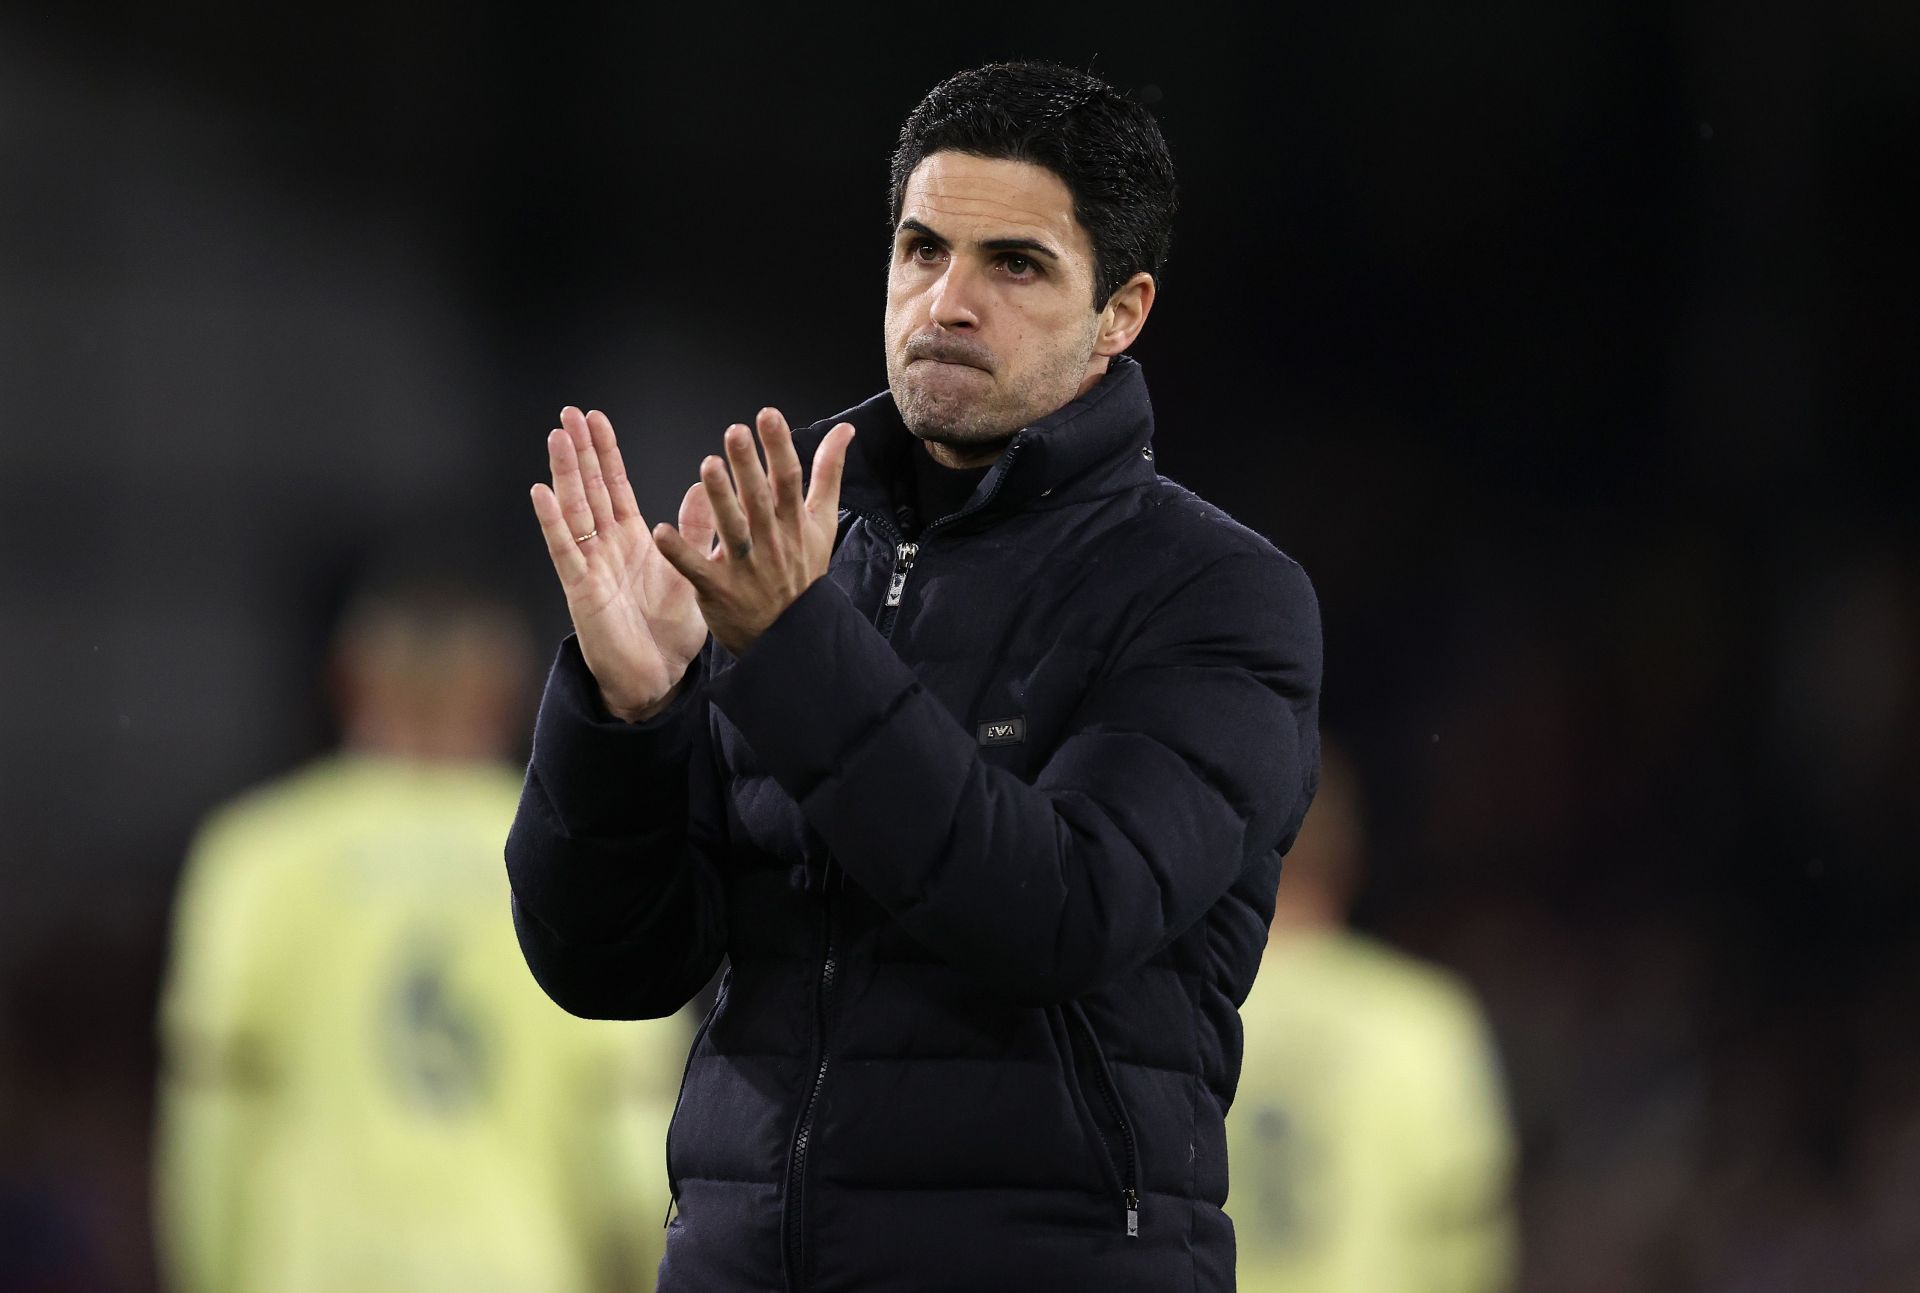 Arsenal manager Mikel Arteta needs reinforcements to his squad ahead of the new season.